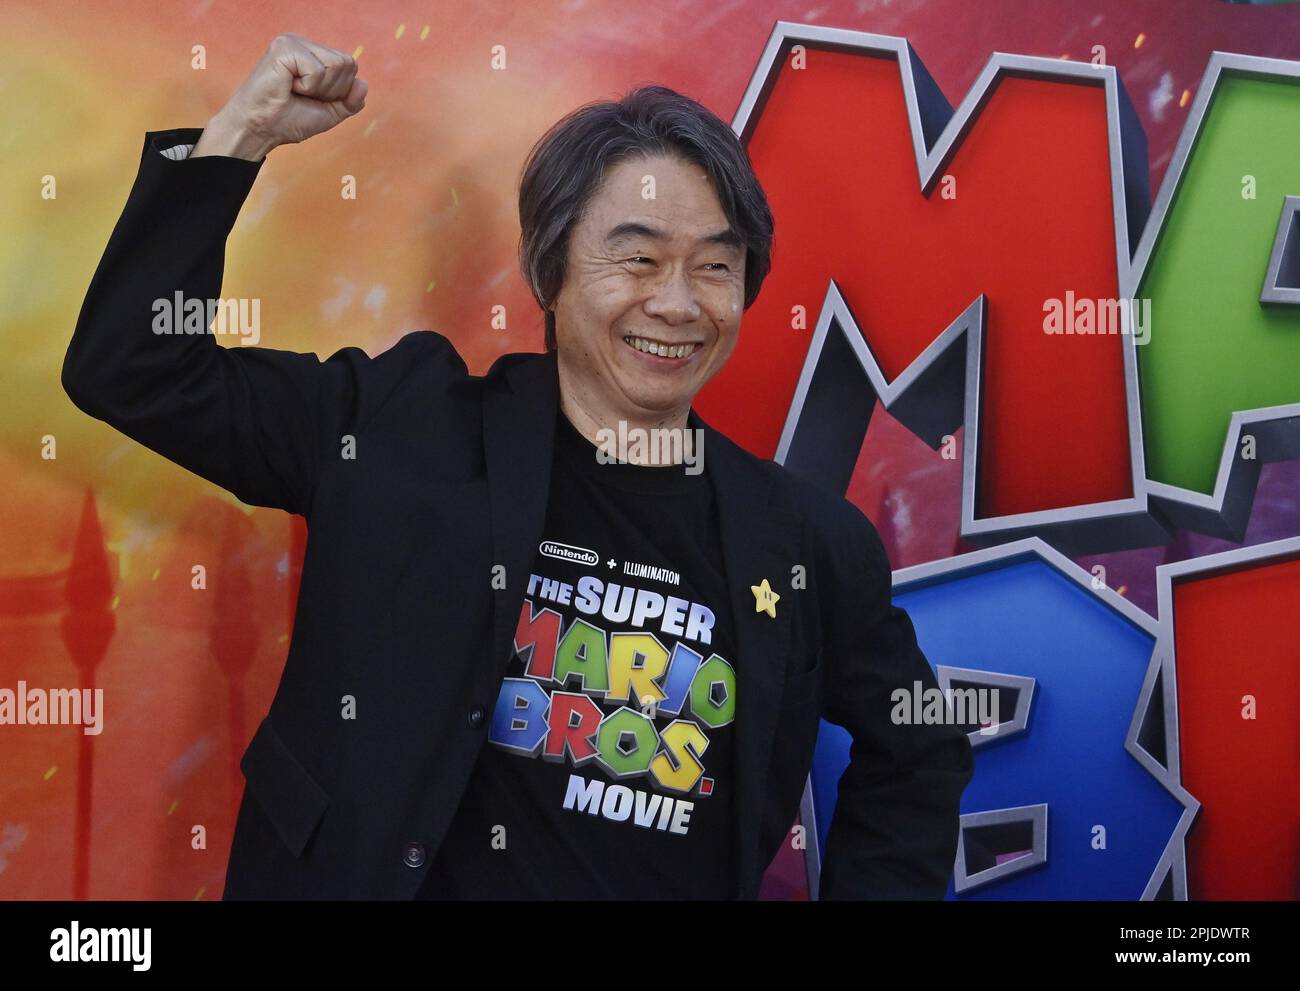 Los Angeles, United States. 01st Apr, 2023. Nintendo's Shigeru Miyamoto attends the premiere of the animated sci-fi fantasy comedy motion picture "The Super Mario Bros. Movie" at Regal L.A. Live in Los Angeles on Saturday, April 1, 2023. Storyline: A Brooklyn plumber named Mario travels through the Mushroom Kingdom with a princess named Peach and an anthropomorphic mushroom named Toad to find Mario's brother, Luigi, and to save the world from a ruthless fire-breathing Koopa named Bowser. Photo by Jim Ruymen/UPI Credit: UPI/Alamy Live News Stock Photo